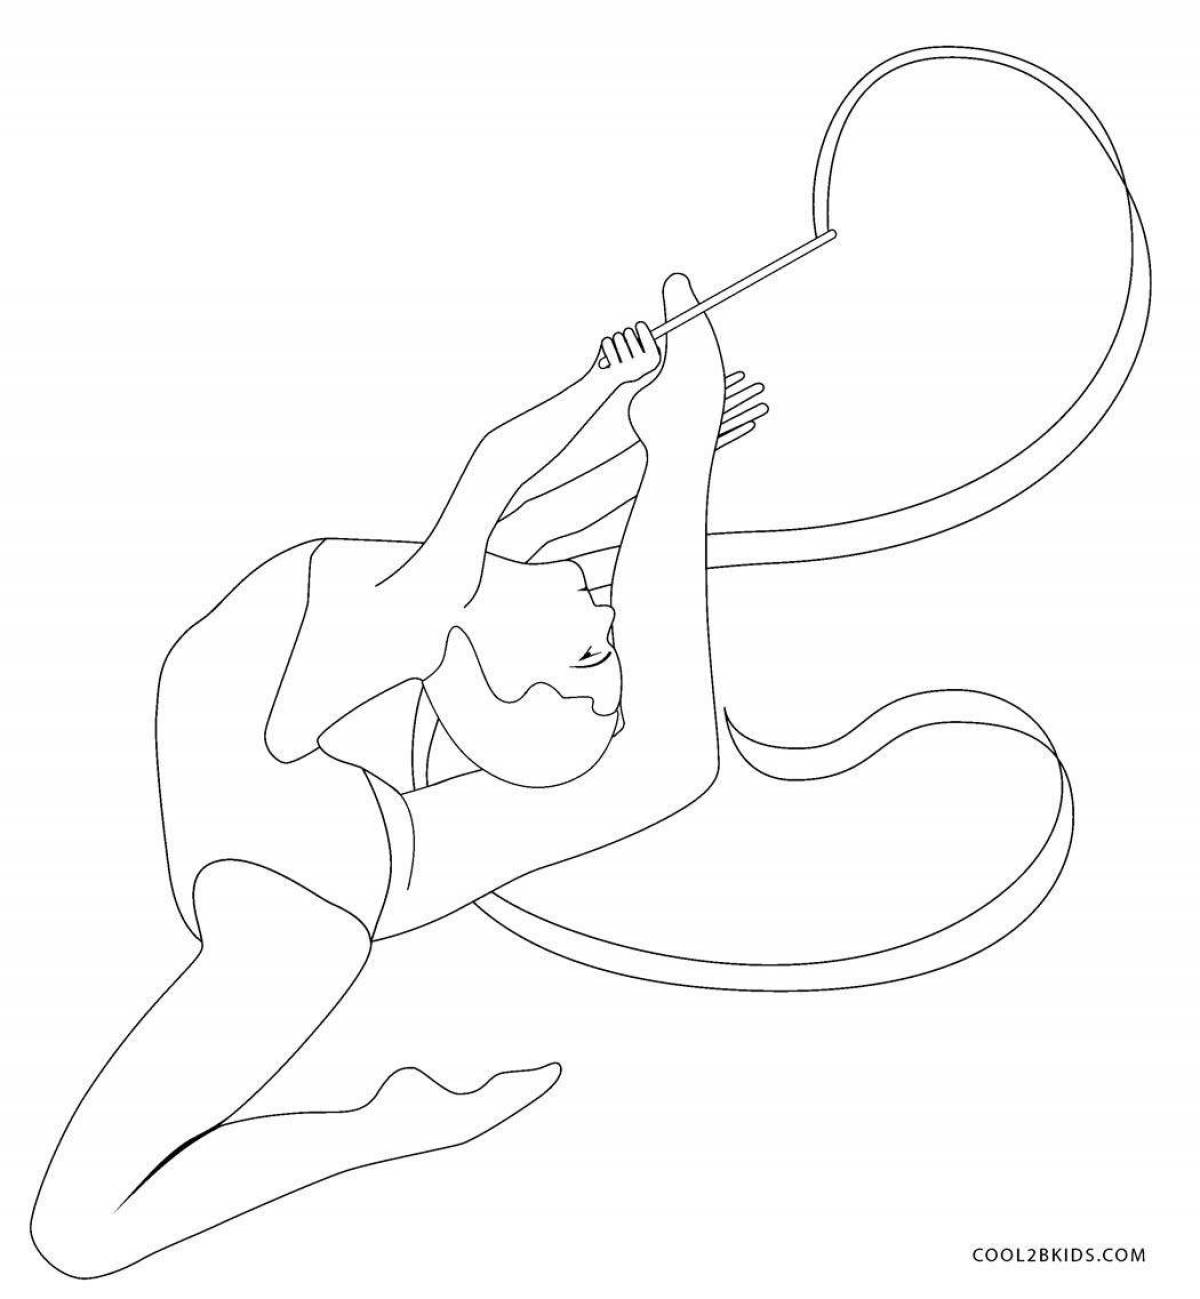 Coloring page amazing gymnasts